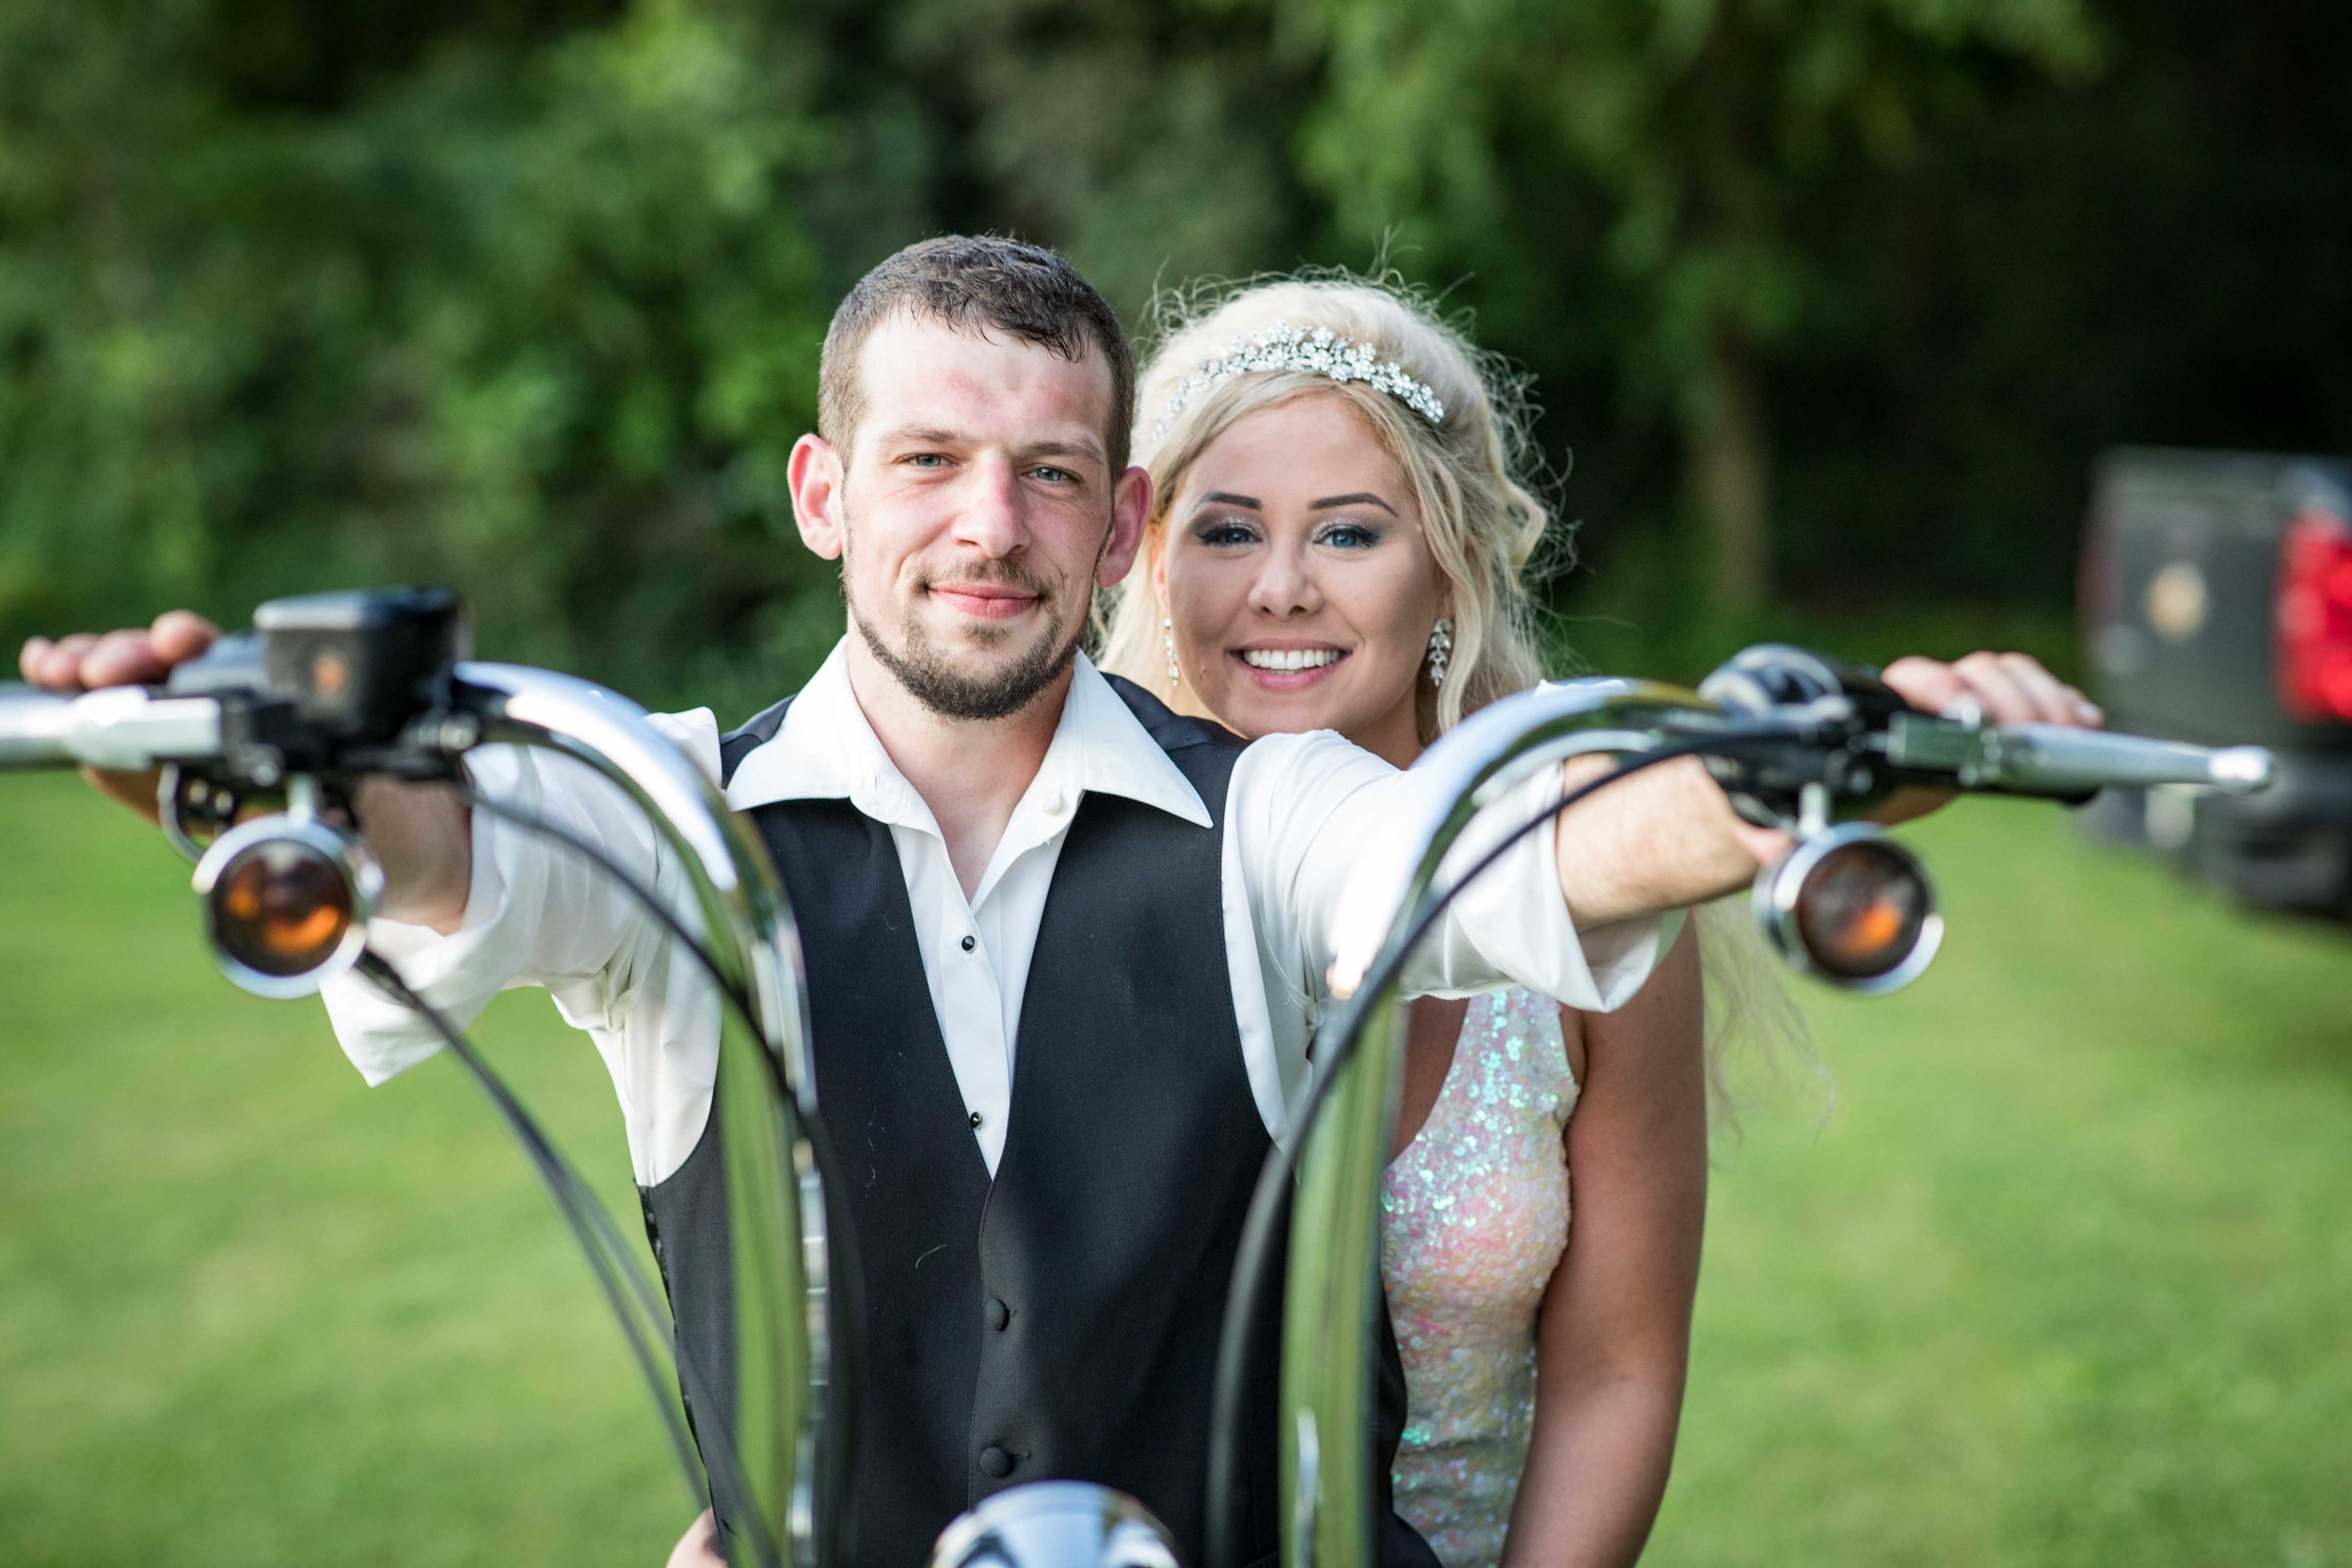  The Bride and Groom pose for a photo on the motorcycle before riding off together. 